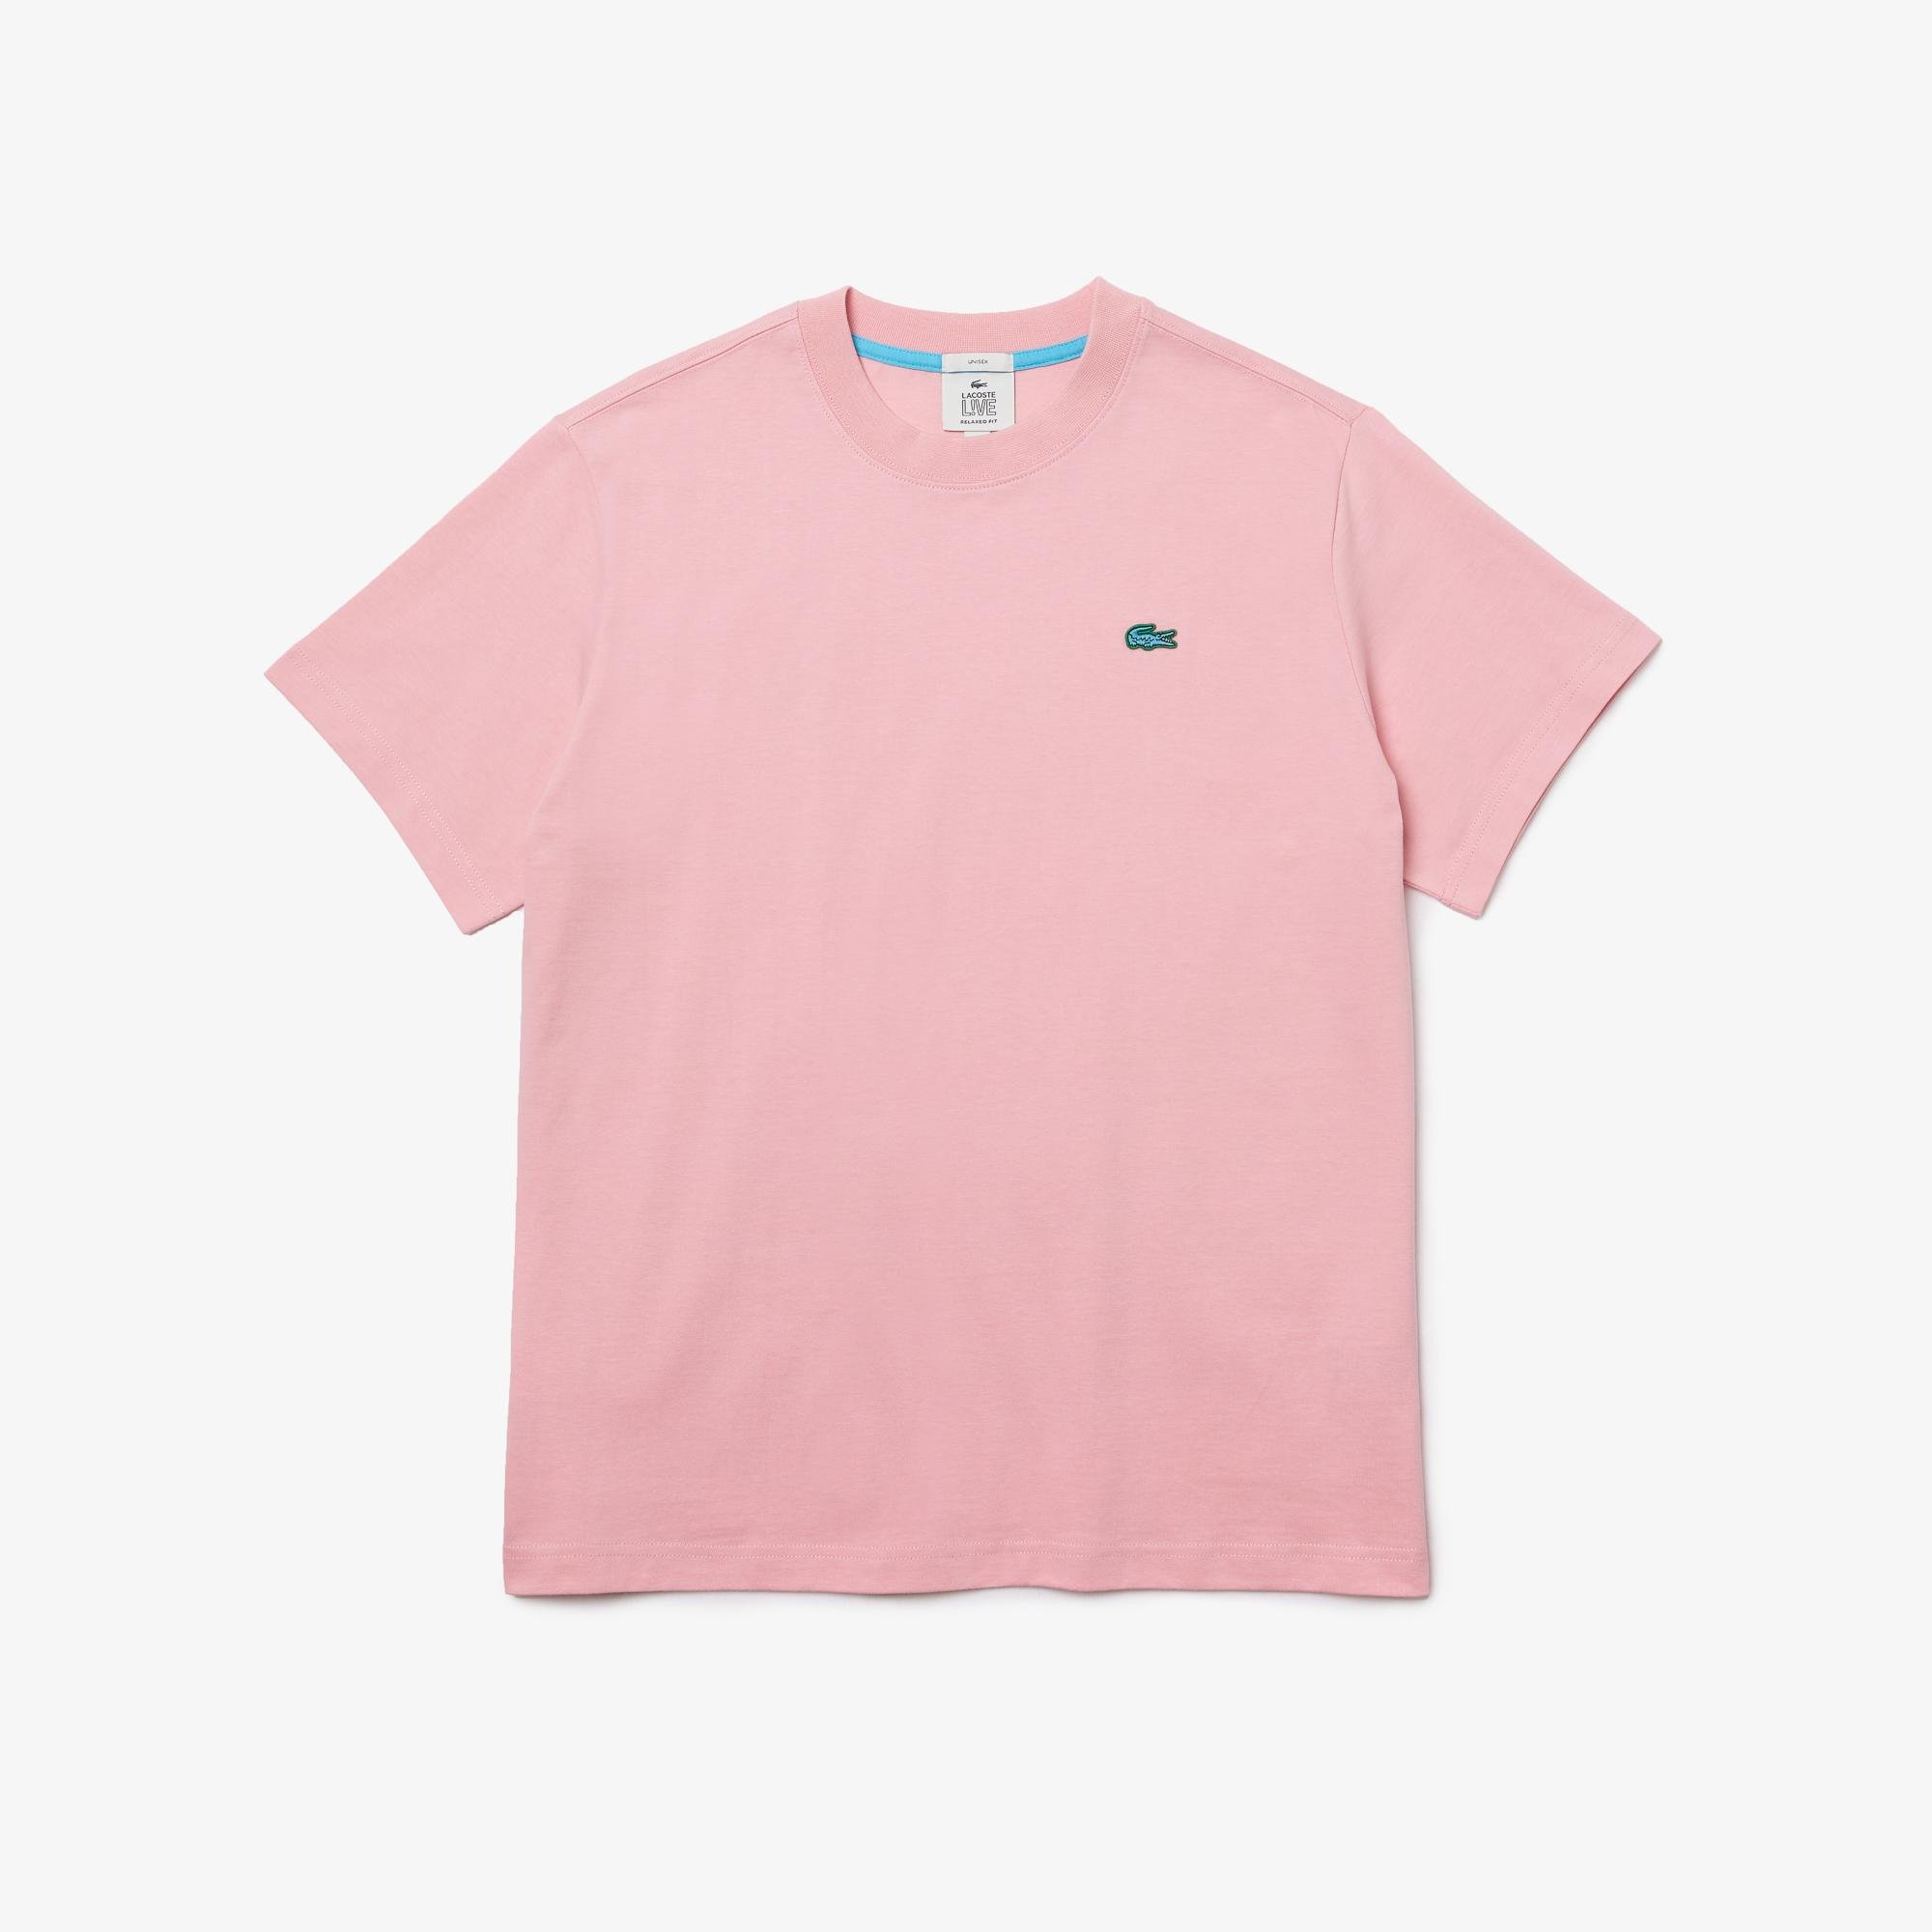 Lacoste L!VE Unisex Relaxed Fit Bisiklet Yaka Pembe T-Shirt